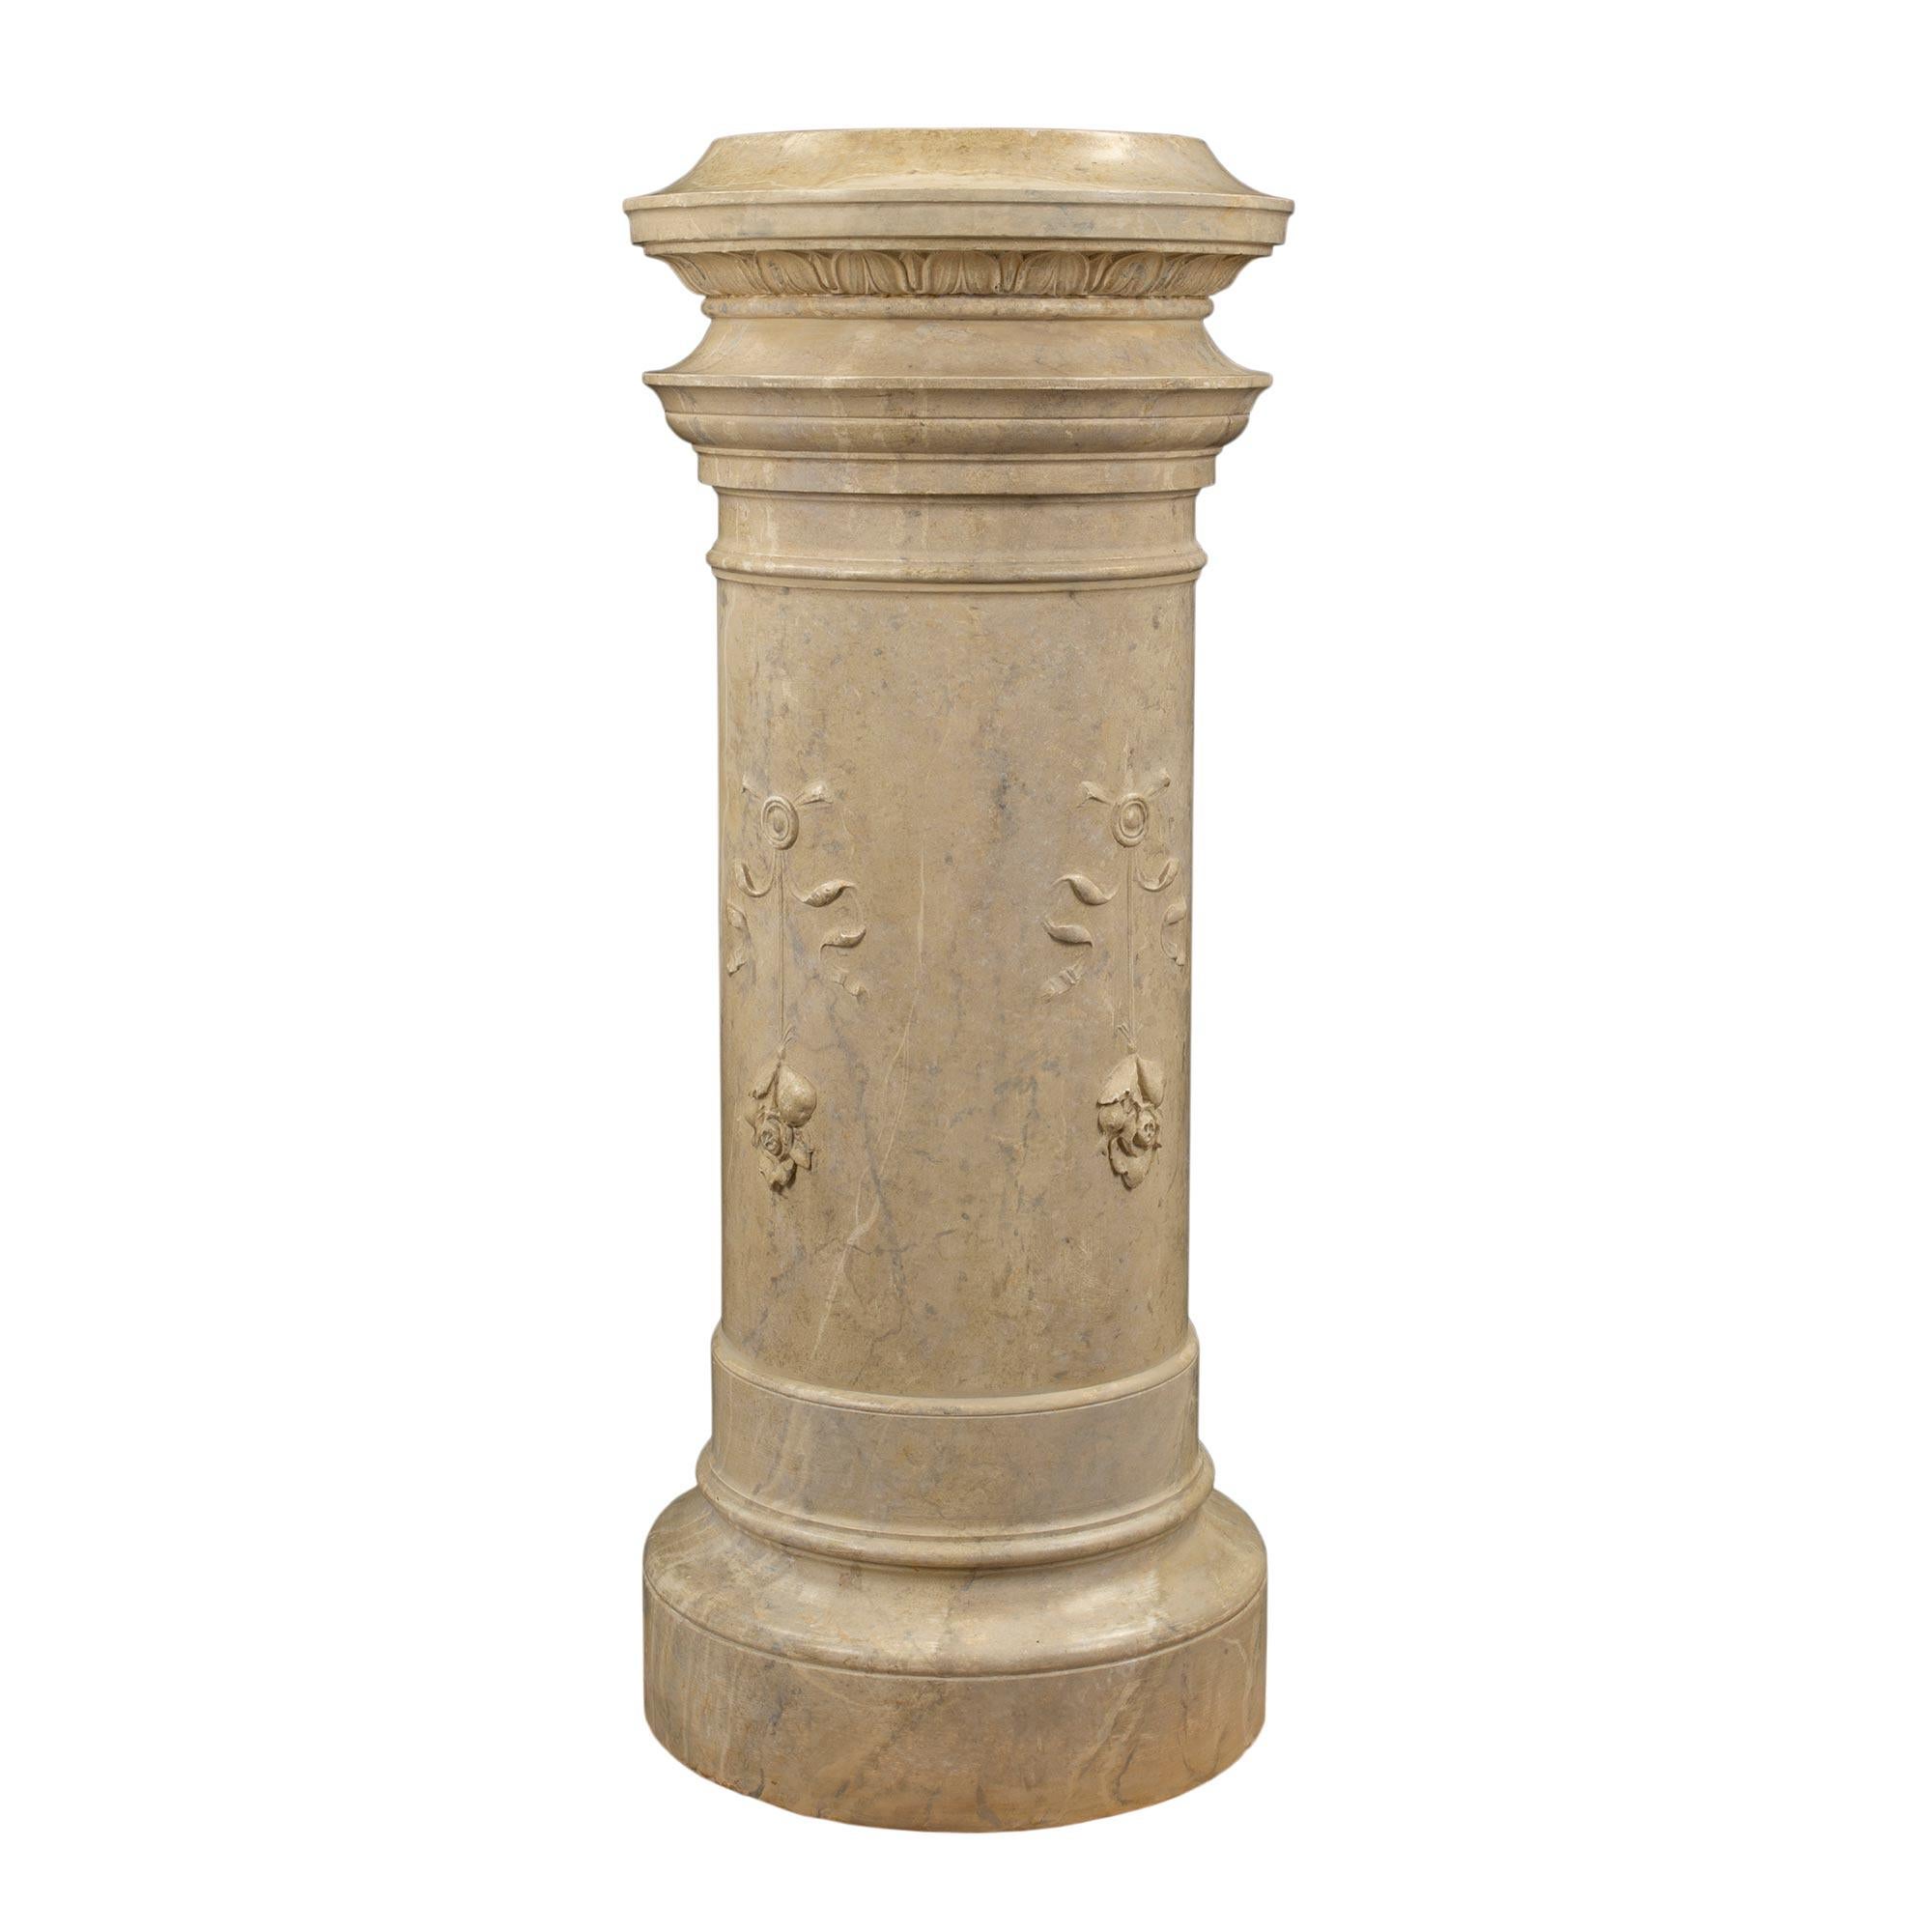 A pair of beautiful French 19th Century Louis XVI st. plaster columns with a faux marble finish. Each superb column/pedestal is raised on a circular base with moulded borders. The columns are decorated with stunning bow designs with hanging rosette.